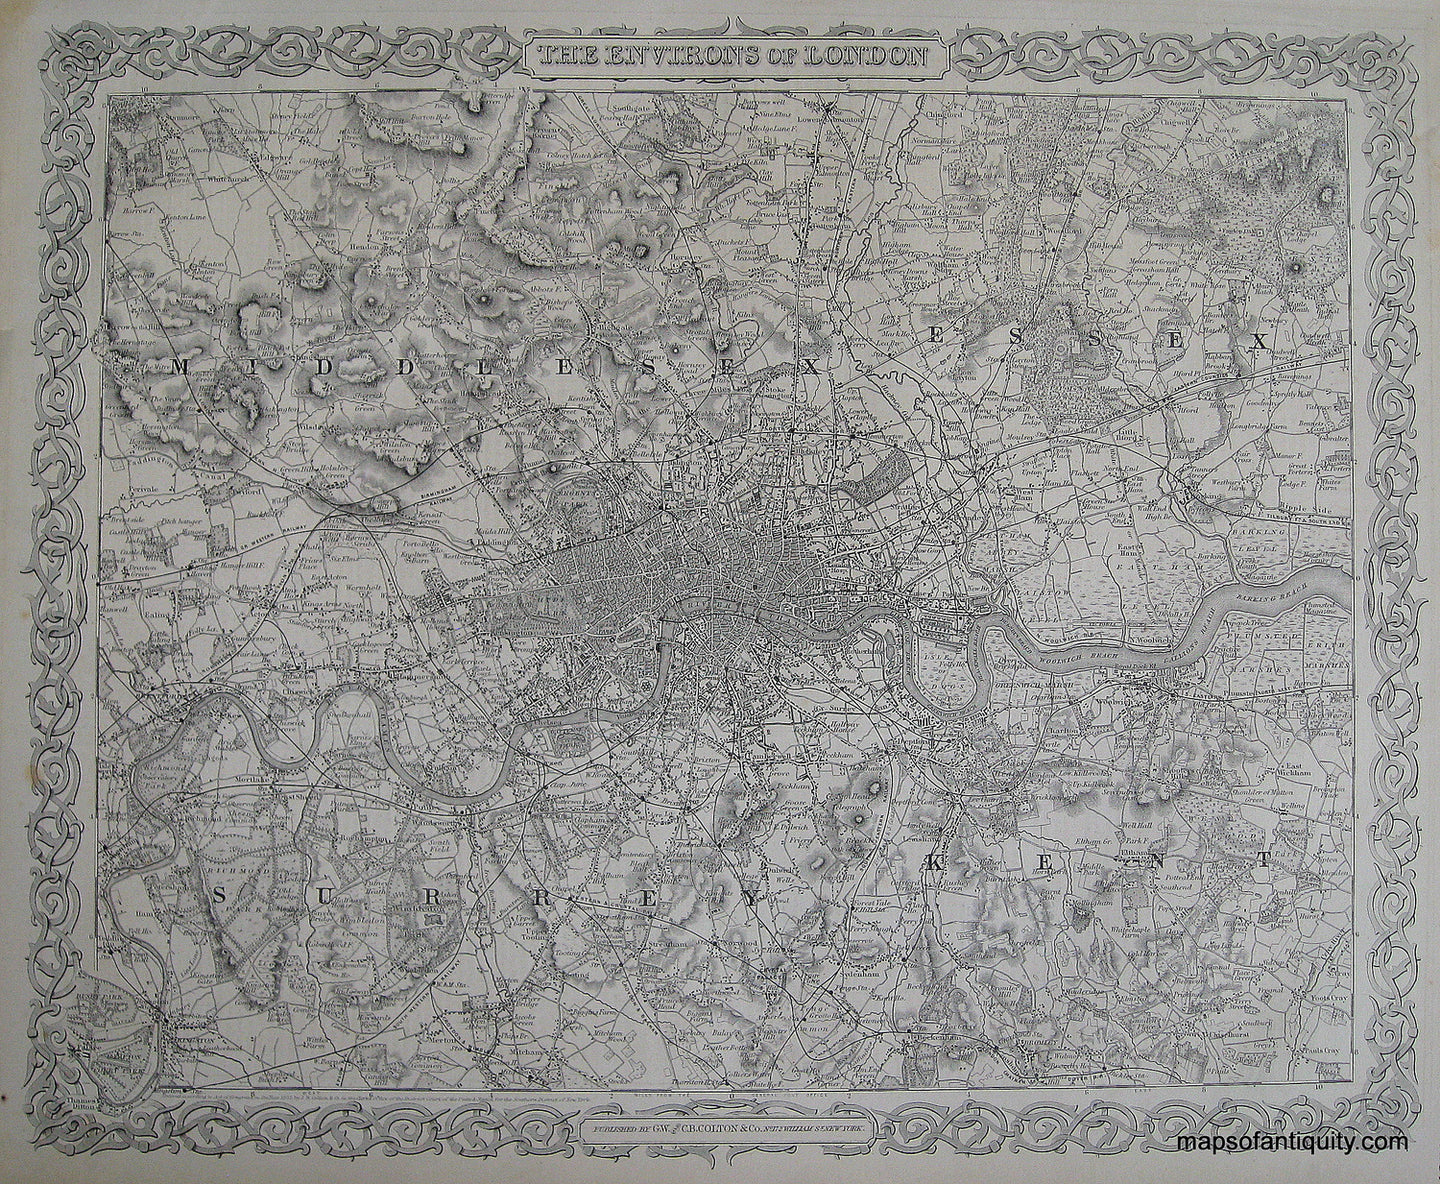 Black-and-White-Antique-Map-The-Environs-of-London-**********-Europe-England-1871-Colton-Maps-Of-Antiquity